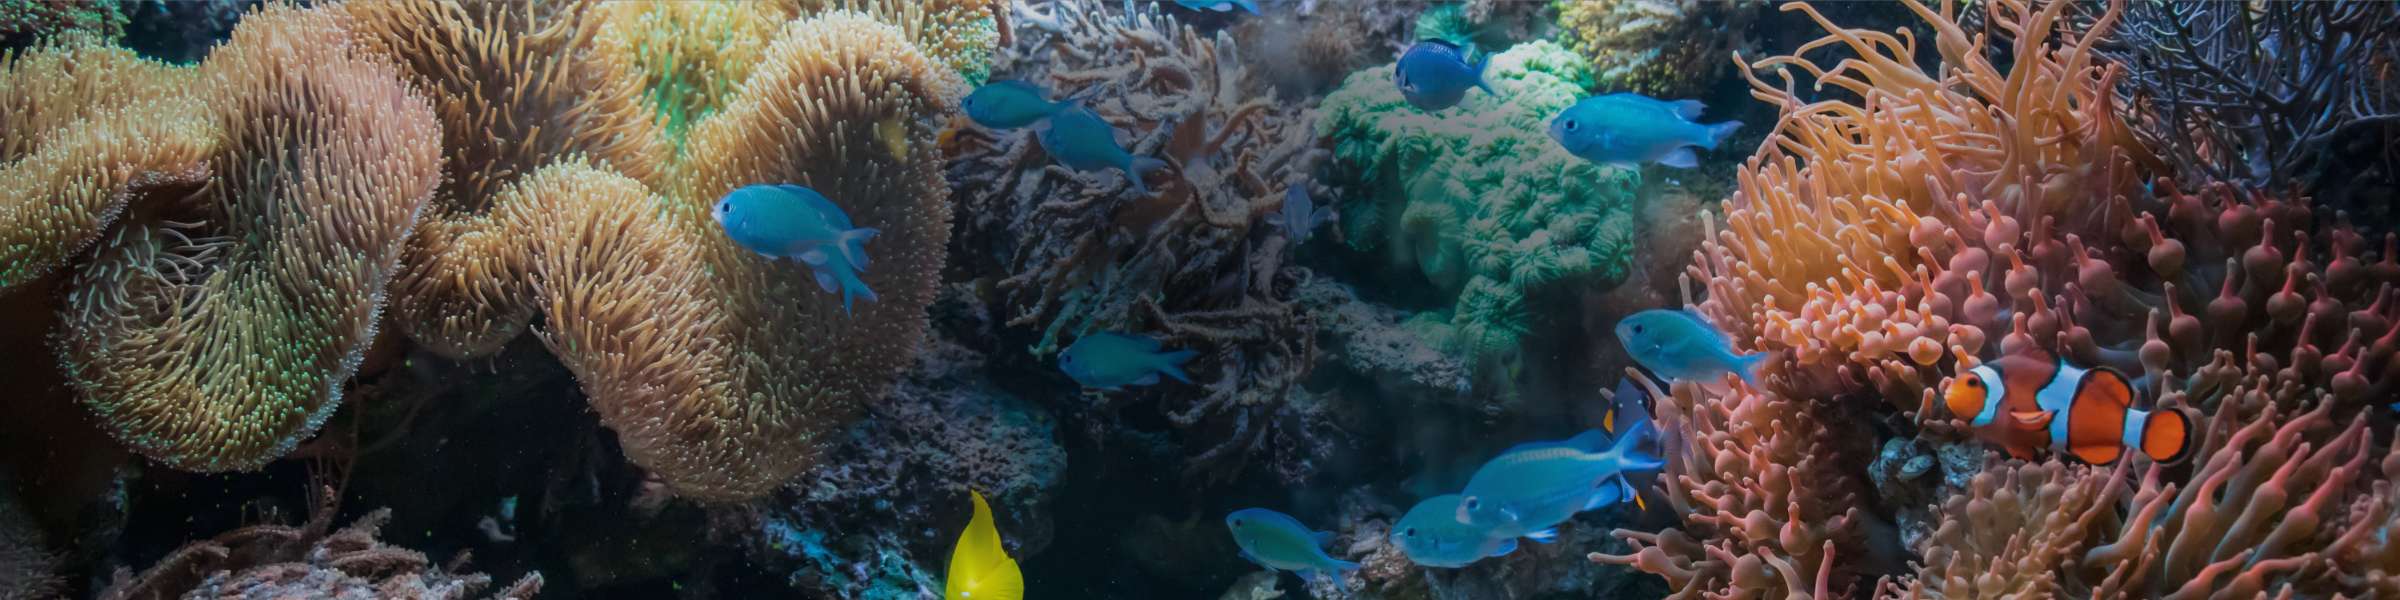 Nutrient-Packed Live Food for Aquariums: How to Feed Live Reef Food to Corals